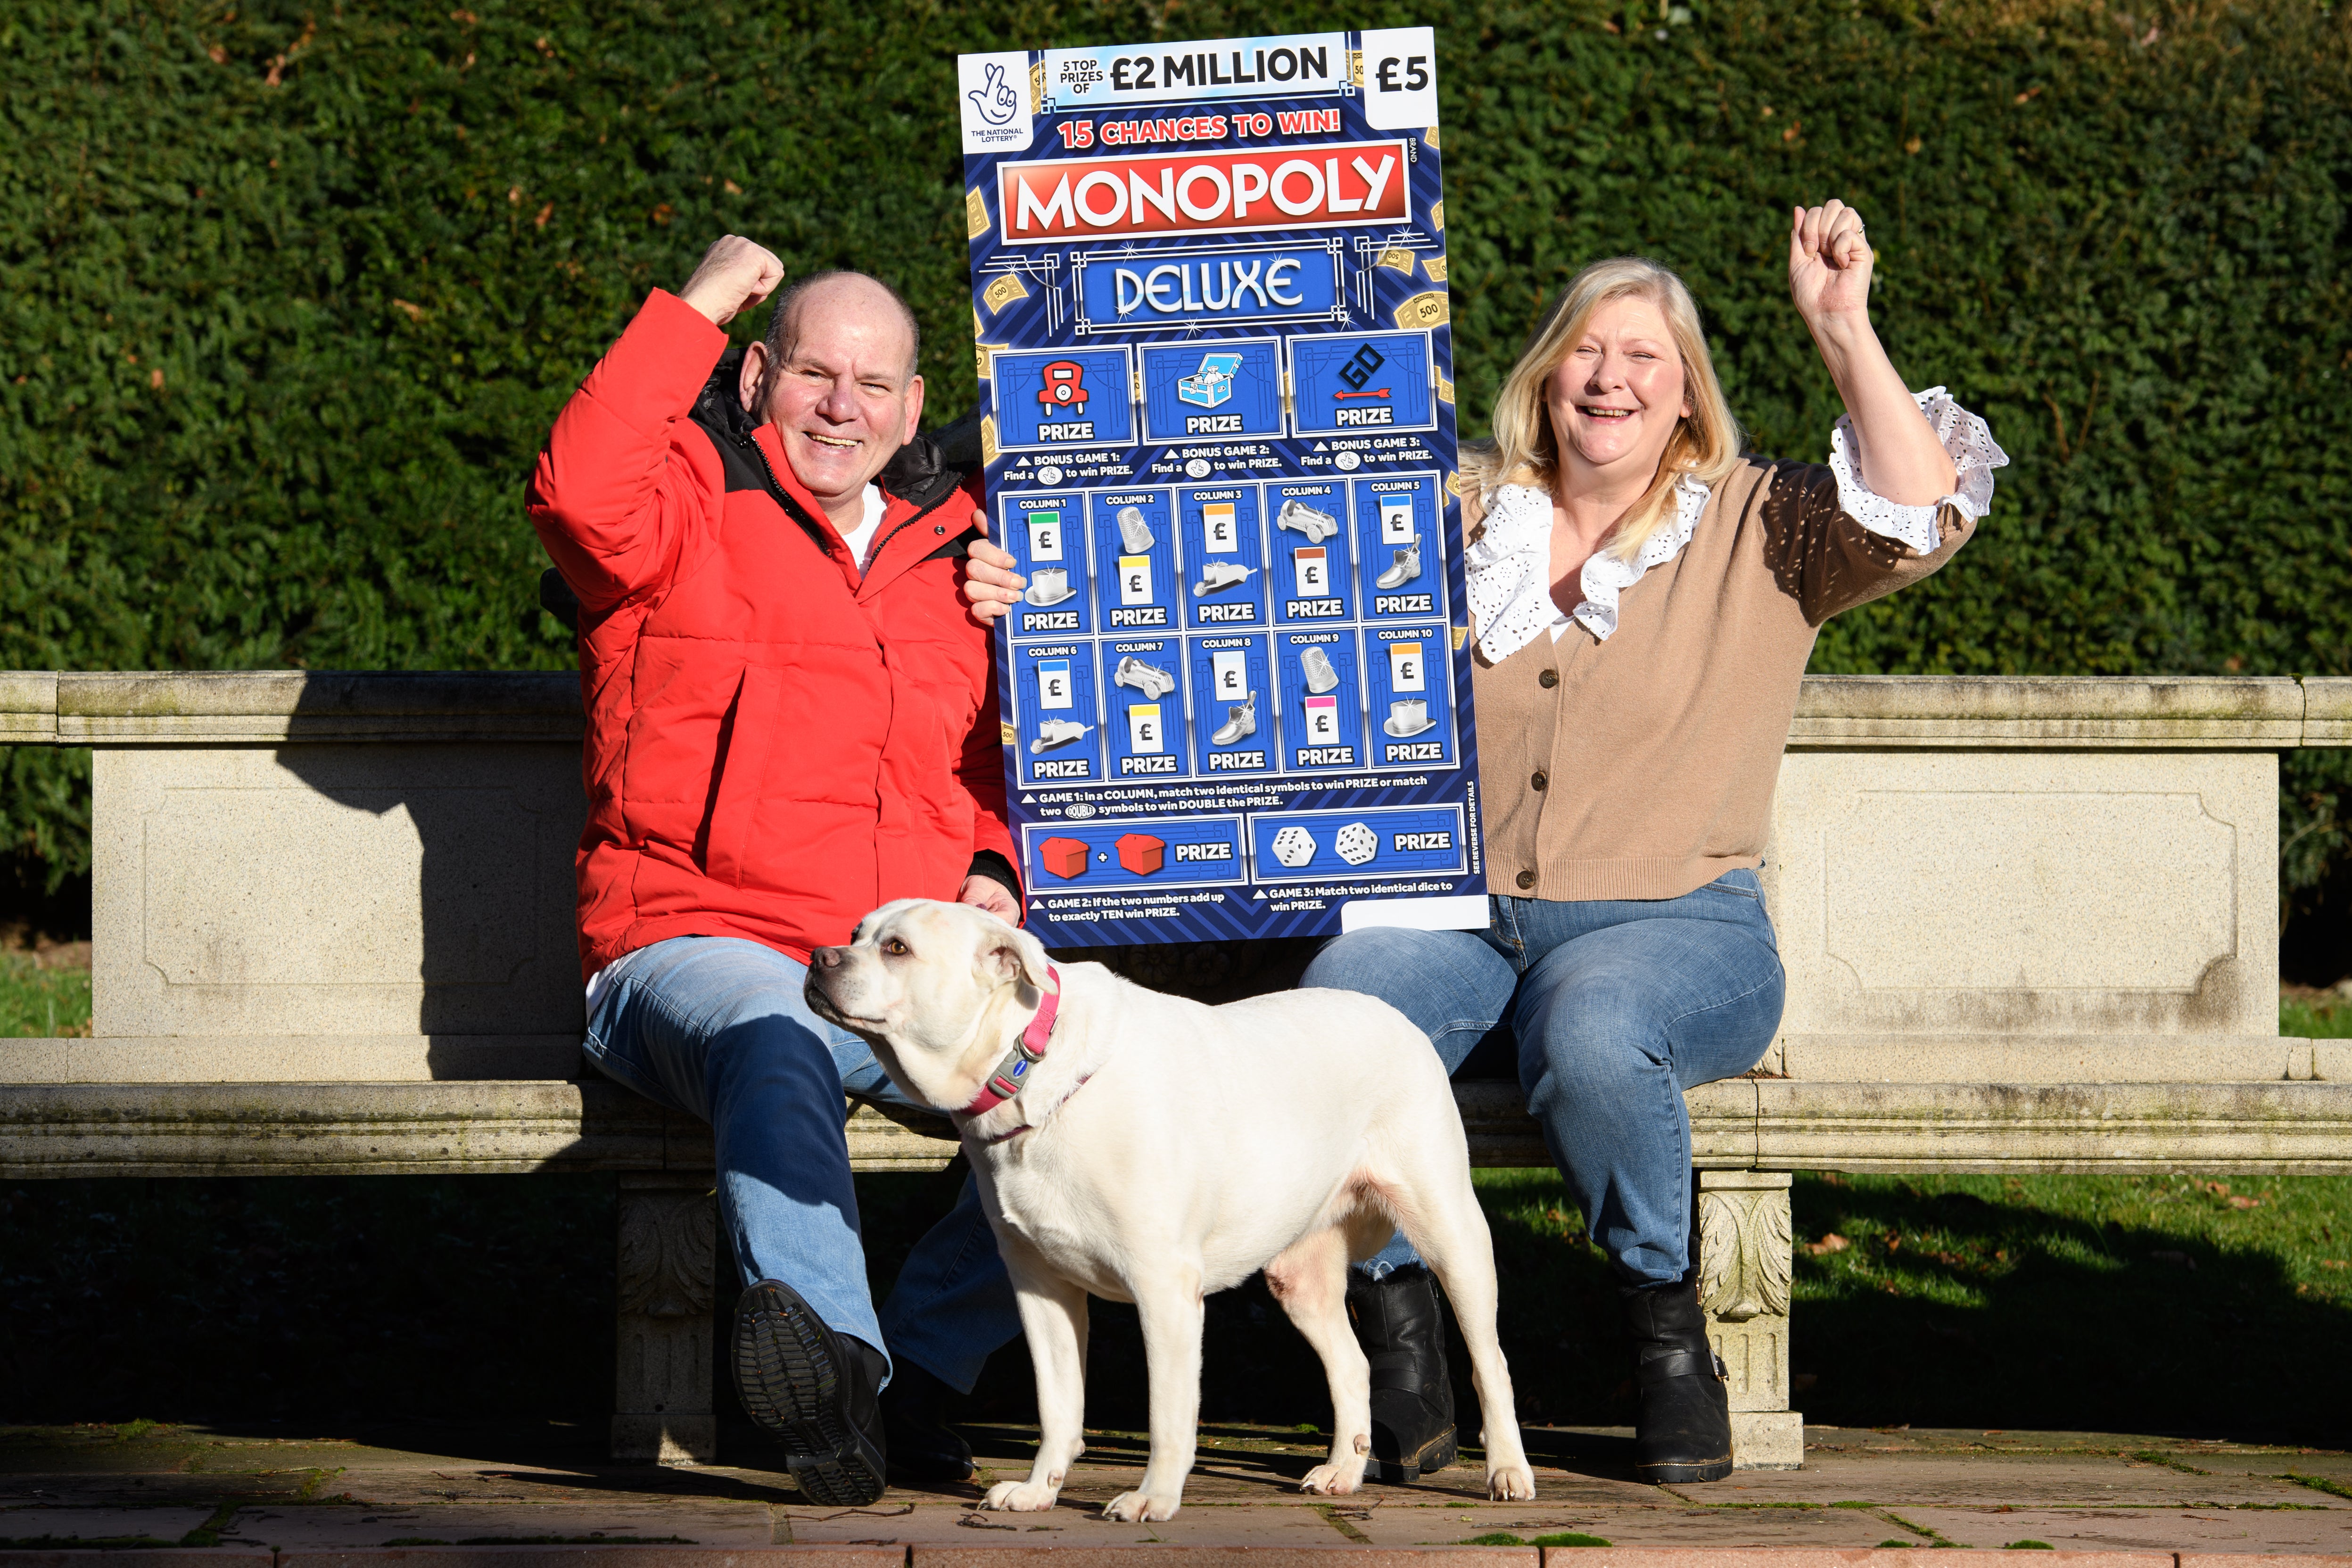 Ian and Sandra with their dog Meg. The couple say the first thing they do with their winnings is pay for Meg’s operation. Undated image from Oli Scarff/Camelot